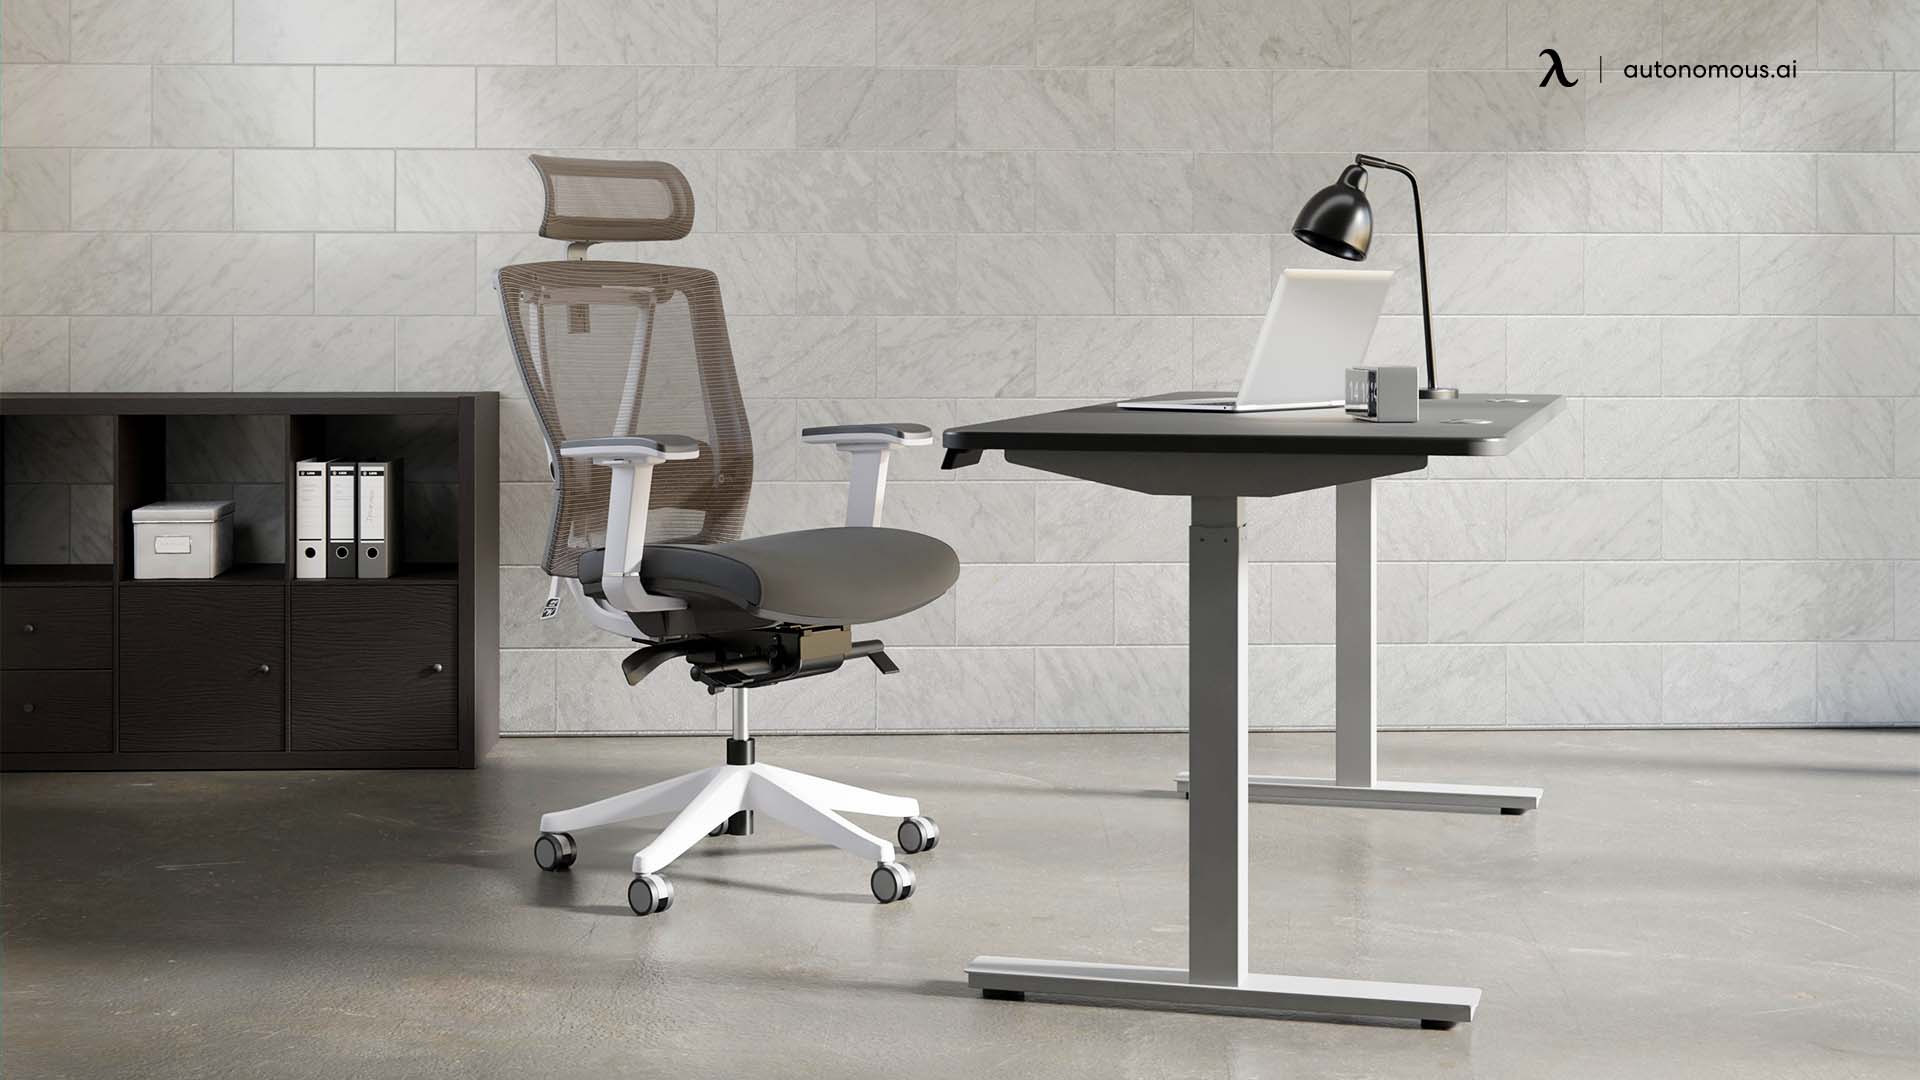 Why Use White and Grey for Your Chair?